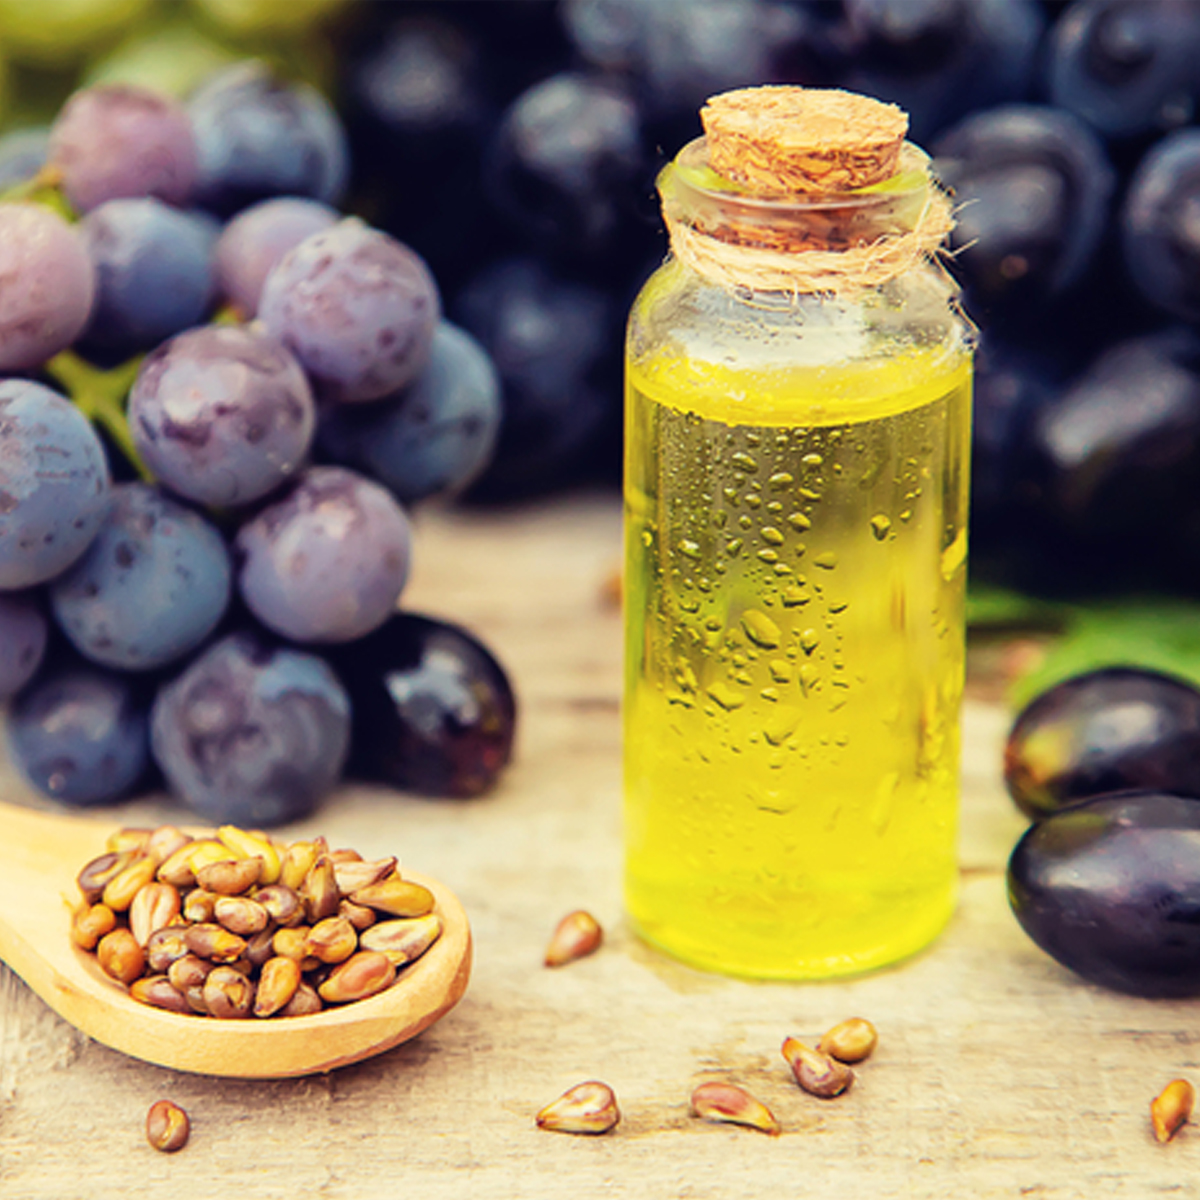 A small jar of grapeseed oil next to a spoonful of grape seeds with a bunch of purple grapes in the background.